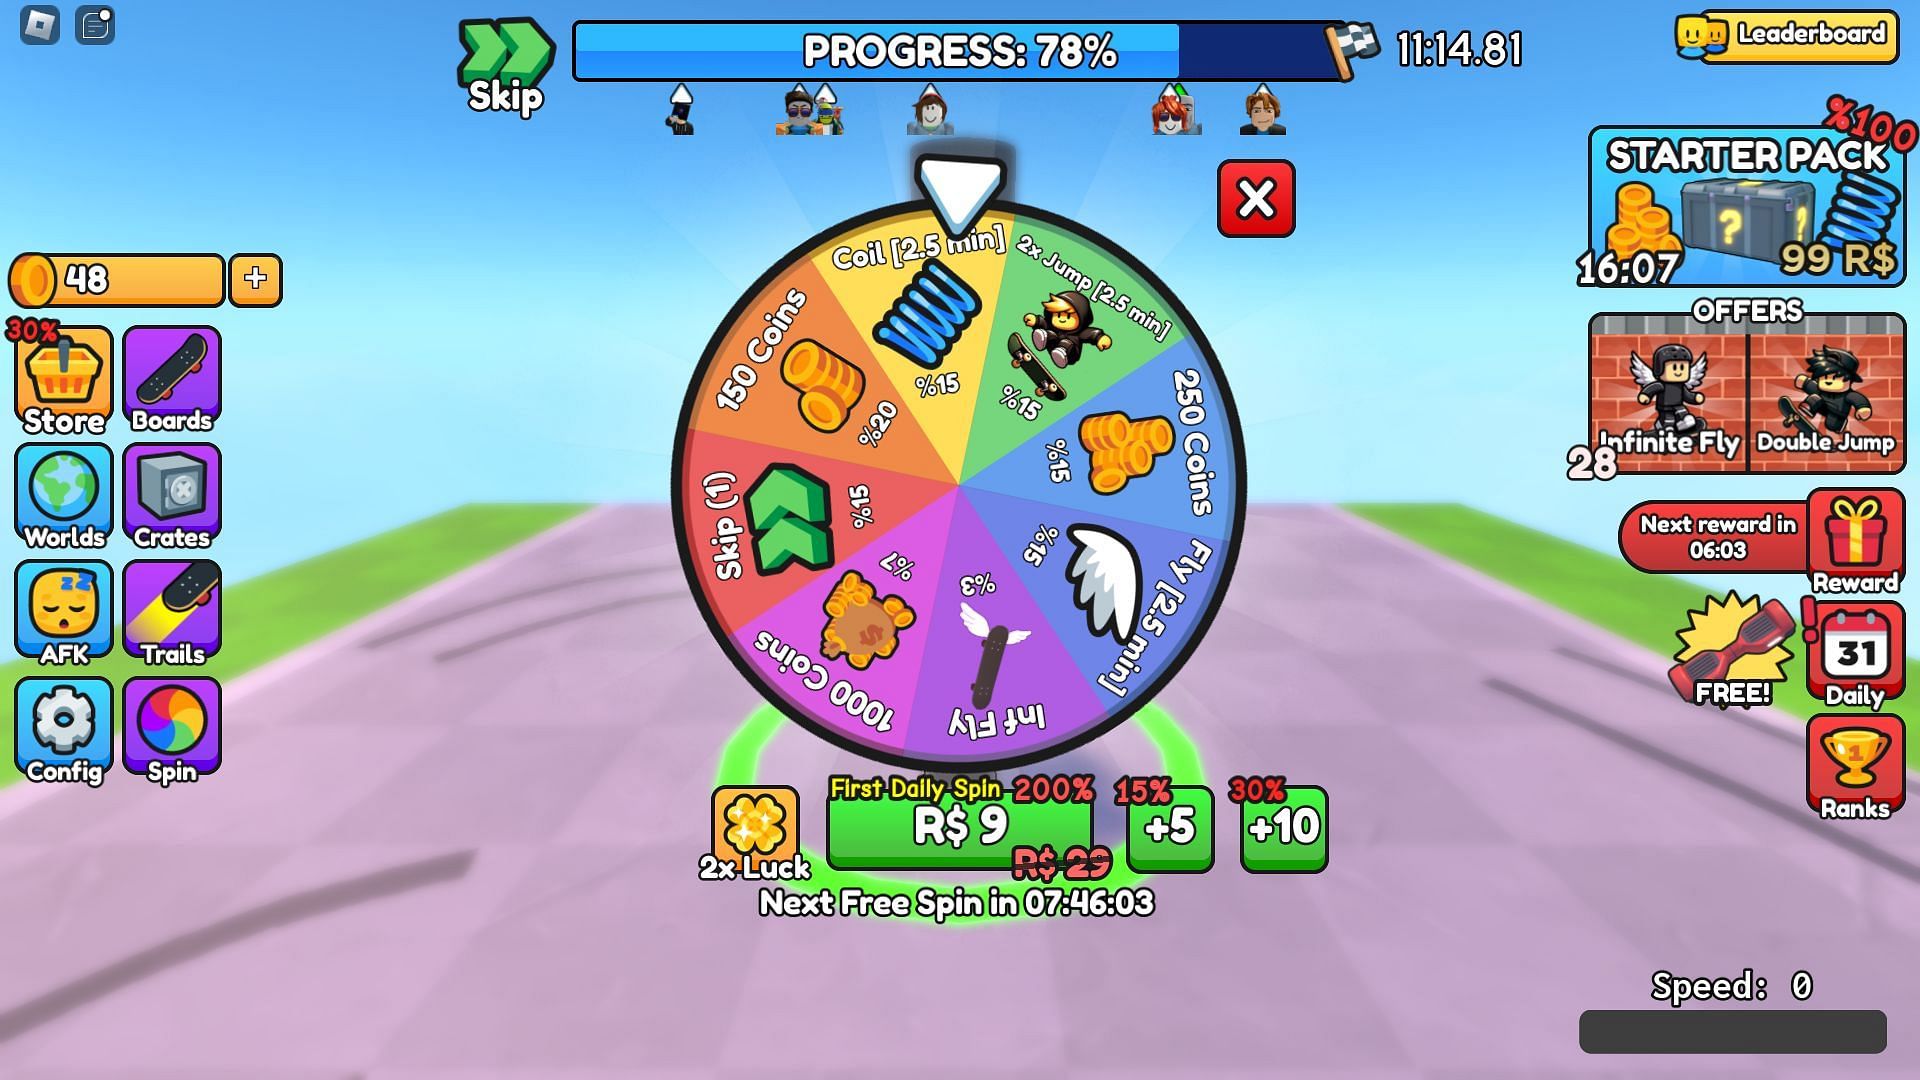 The spin wheel offers tiered rewards (Image via Roblox)